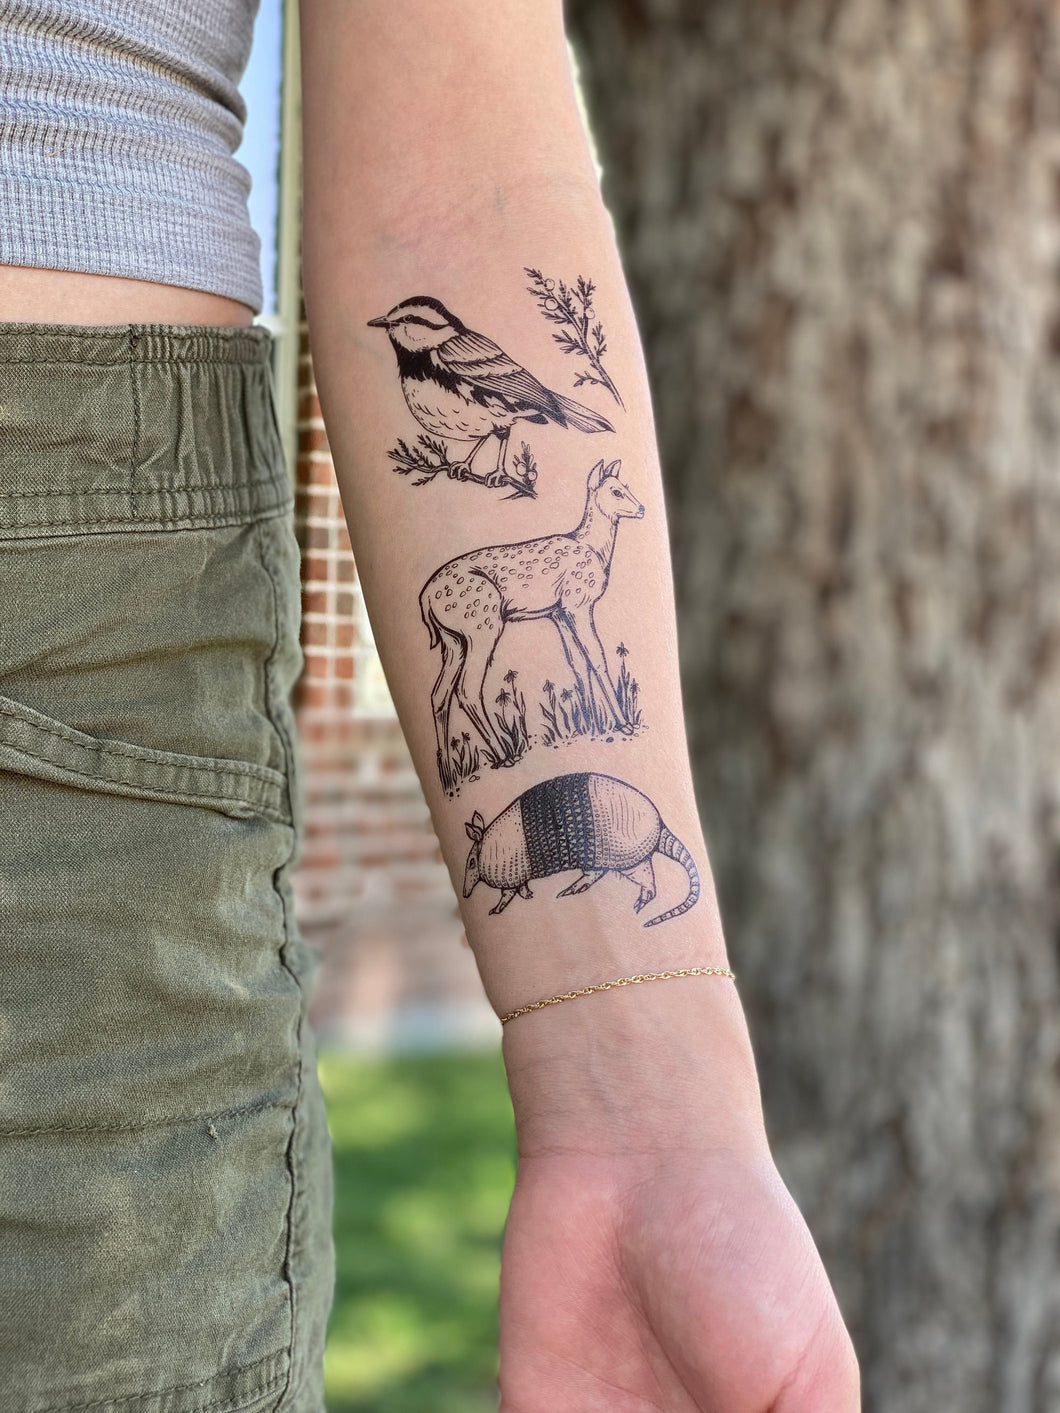 Hill Country Wildlife Temporary Tattoo Collection, Texas Wildlife, Golden Cheeked Warbler, Fawn, Deer, Armadillo, Juniper Tree, Nature